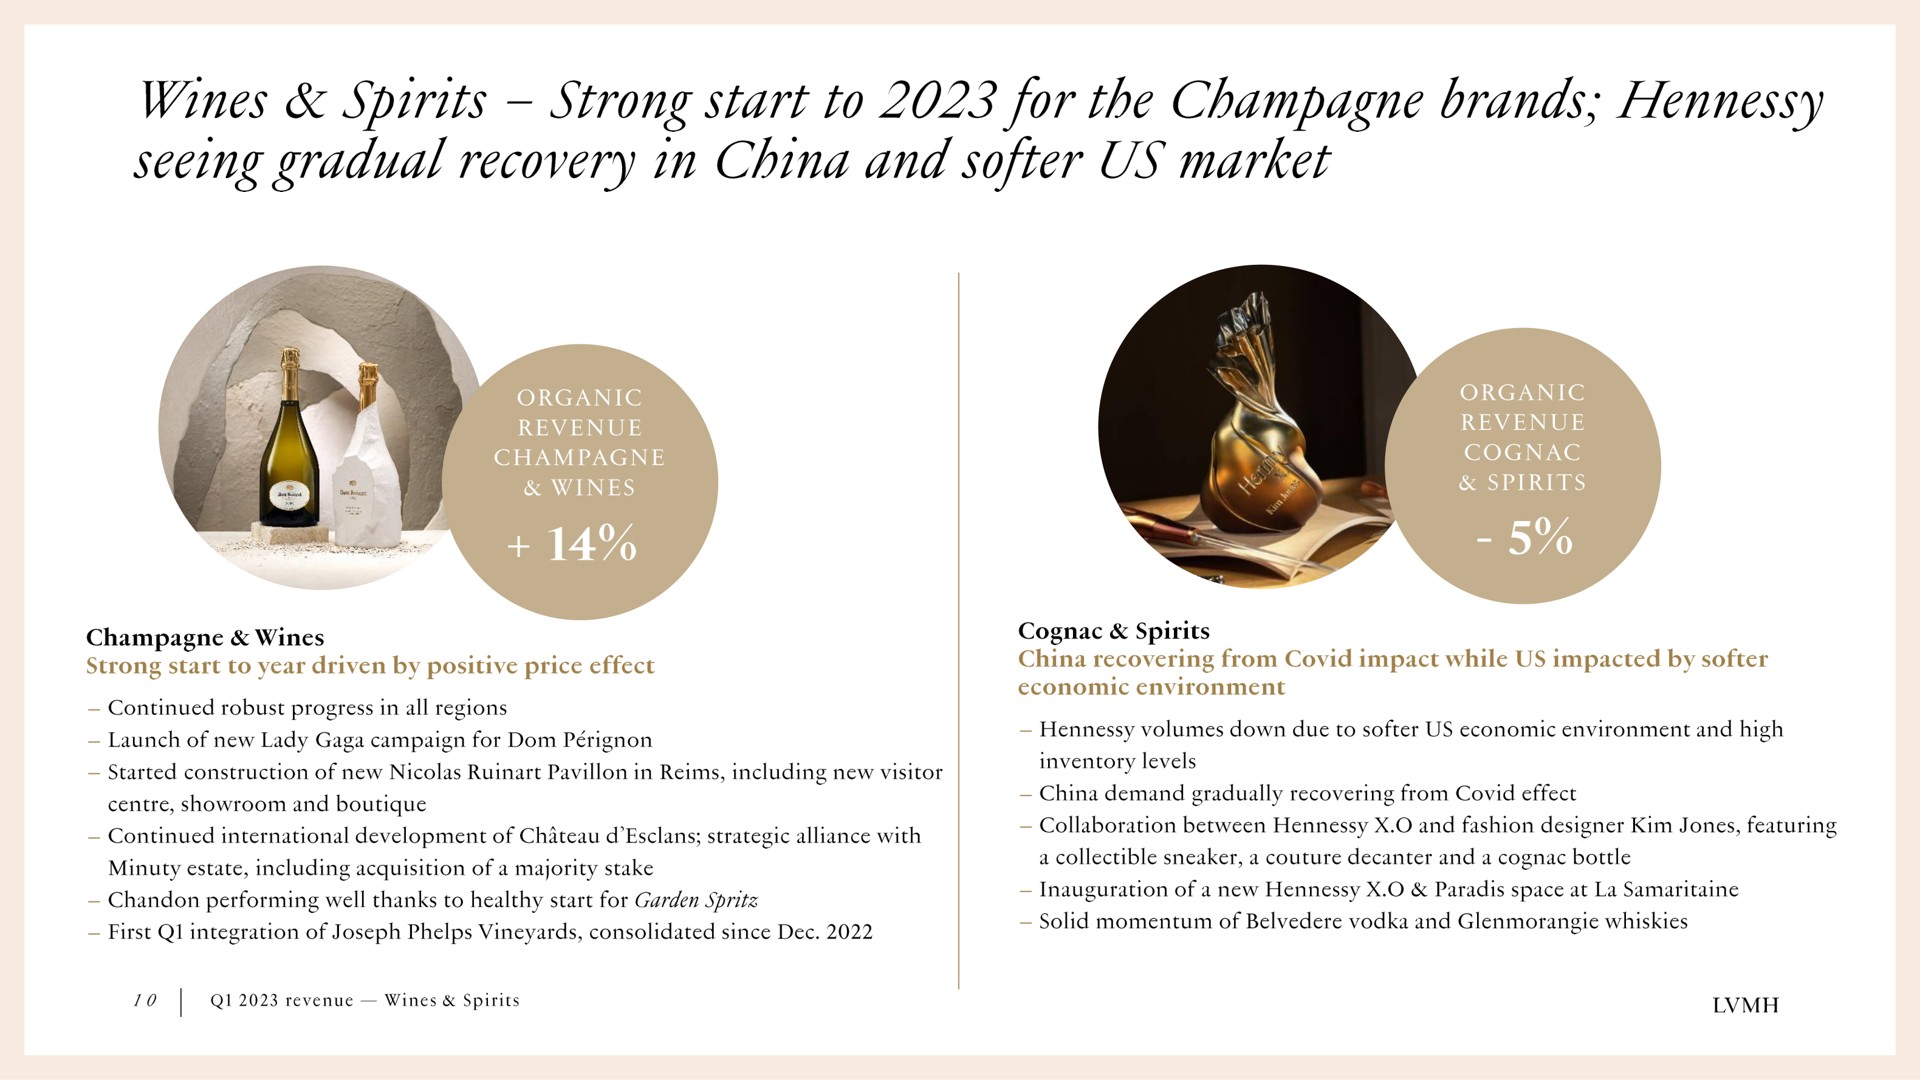 wines spirits strong start to for the champagne brands seeing gradual recovery in china and us market | LVMH